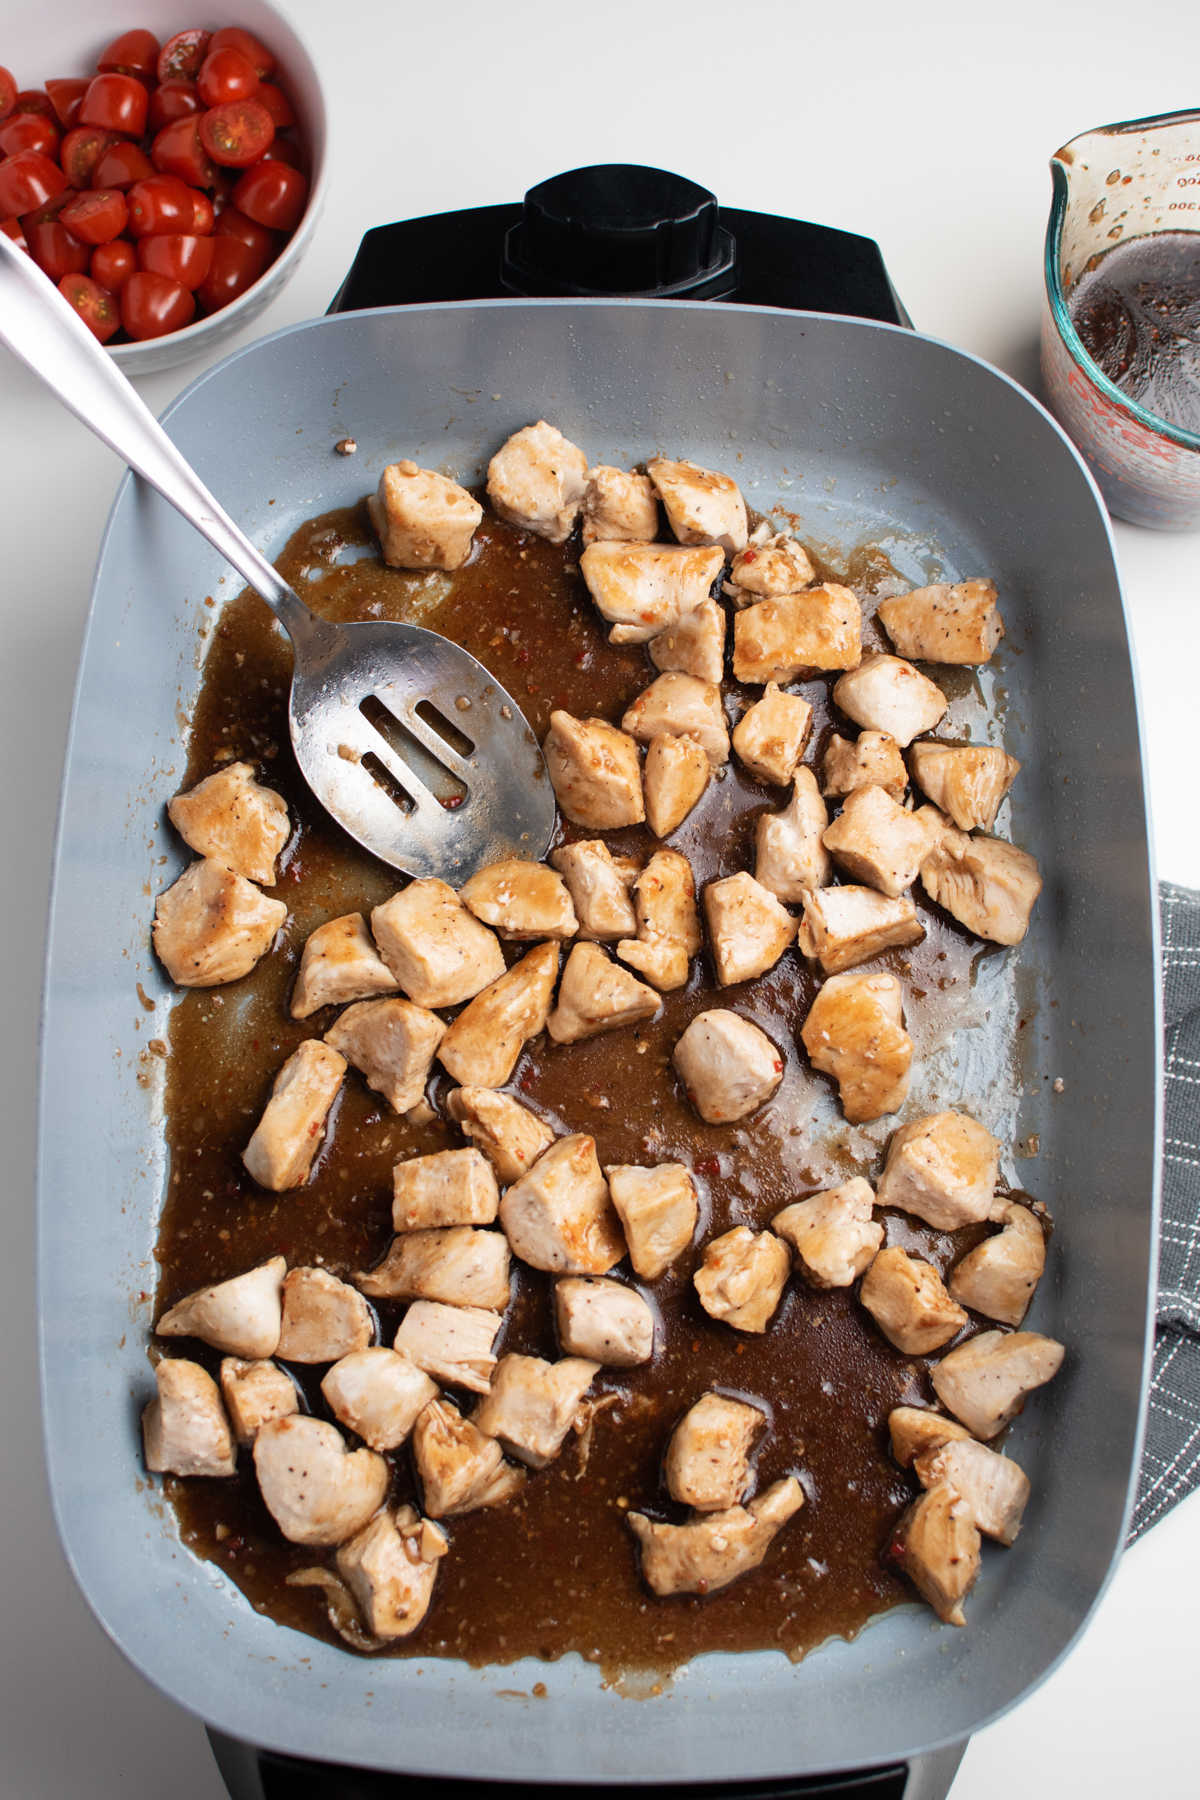 Balsamic sauce, cubed chicken pieces, and slotted spoon in an electric skillet.